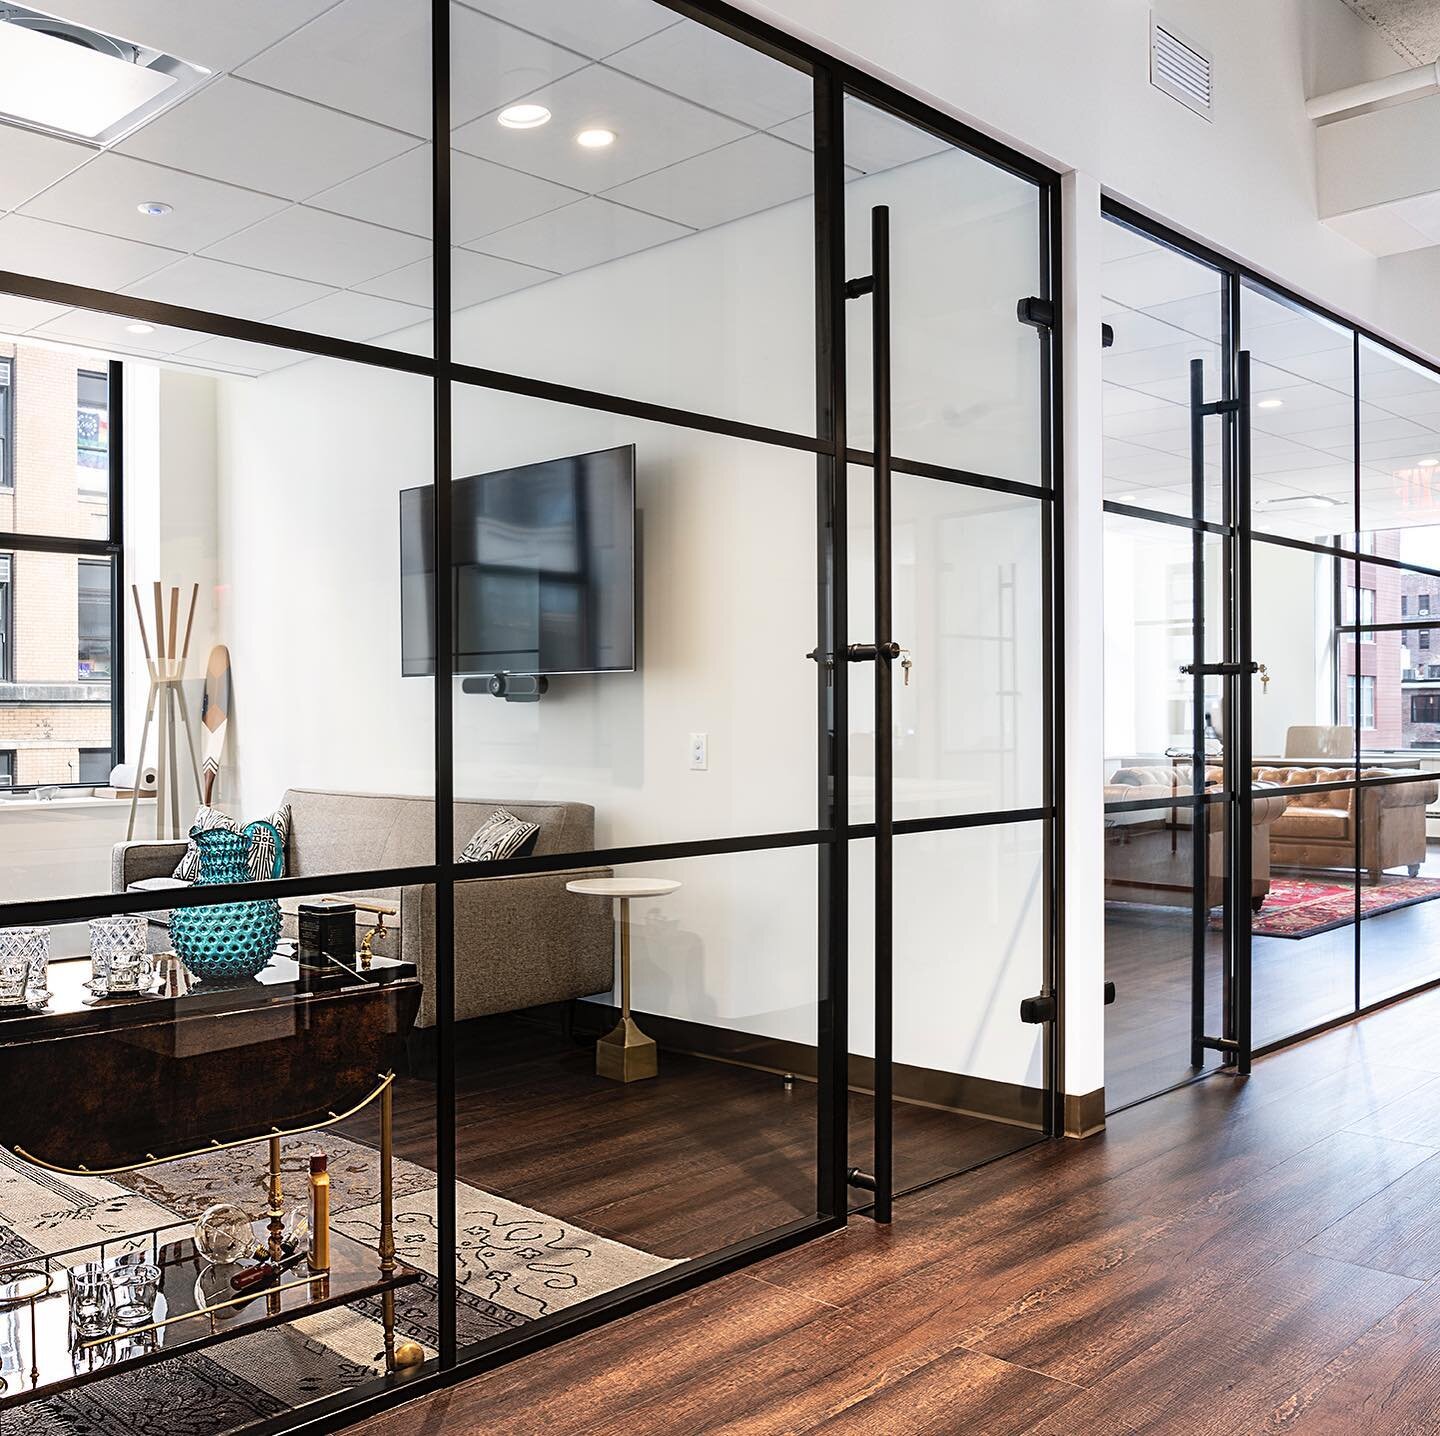 Noble People is not your typical media company. And its space isn&rsquo;t typical either. Together with @meridian_design_associates we turned 15,000 sq. ft. into a more comforting space. 
.
.
.
#officedesign #smartsolutions #beautifulspaces #glasswal